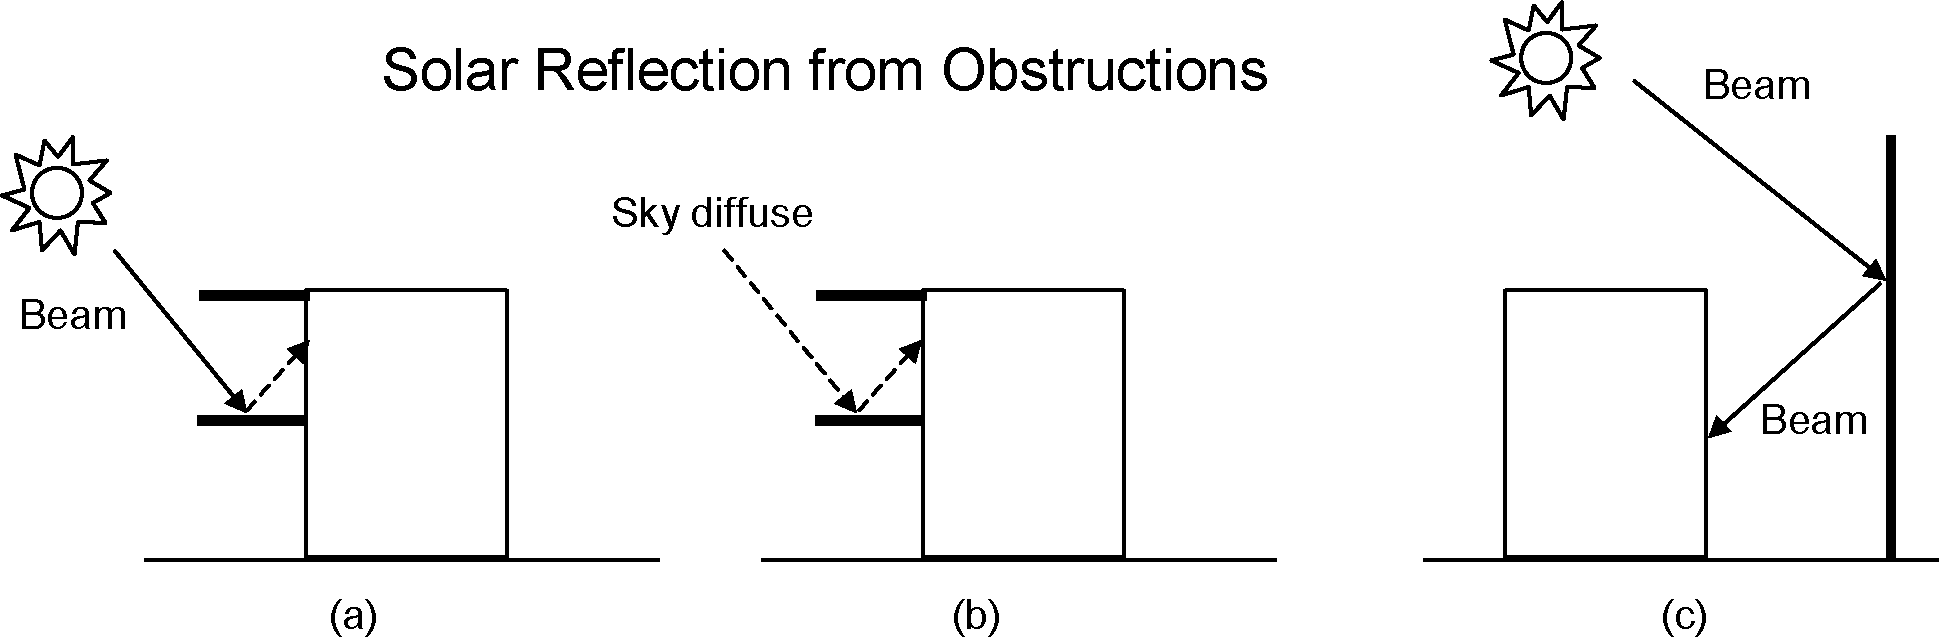 Examples of solar reflection from shadowing surfaces in the Shading series of input objects. Solid arrows are beam solar radiation; dashed arrows are diffuse solar radiation. (a) Diffuse reflection of beam solar radiation from the top of an overhang. (b) Diffuse reflection of sky solar radiation from the top of an overhang. (c) Beam-to-beam (specular) reflection from the façade of an adjacent highly-glazed building represented by a vertical shadowing surface.